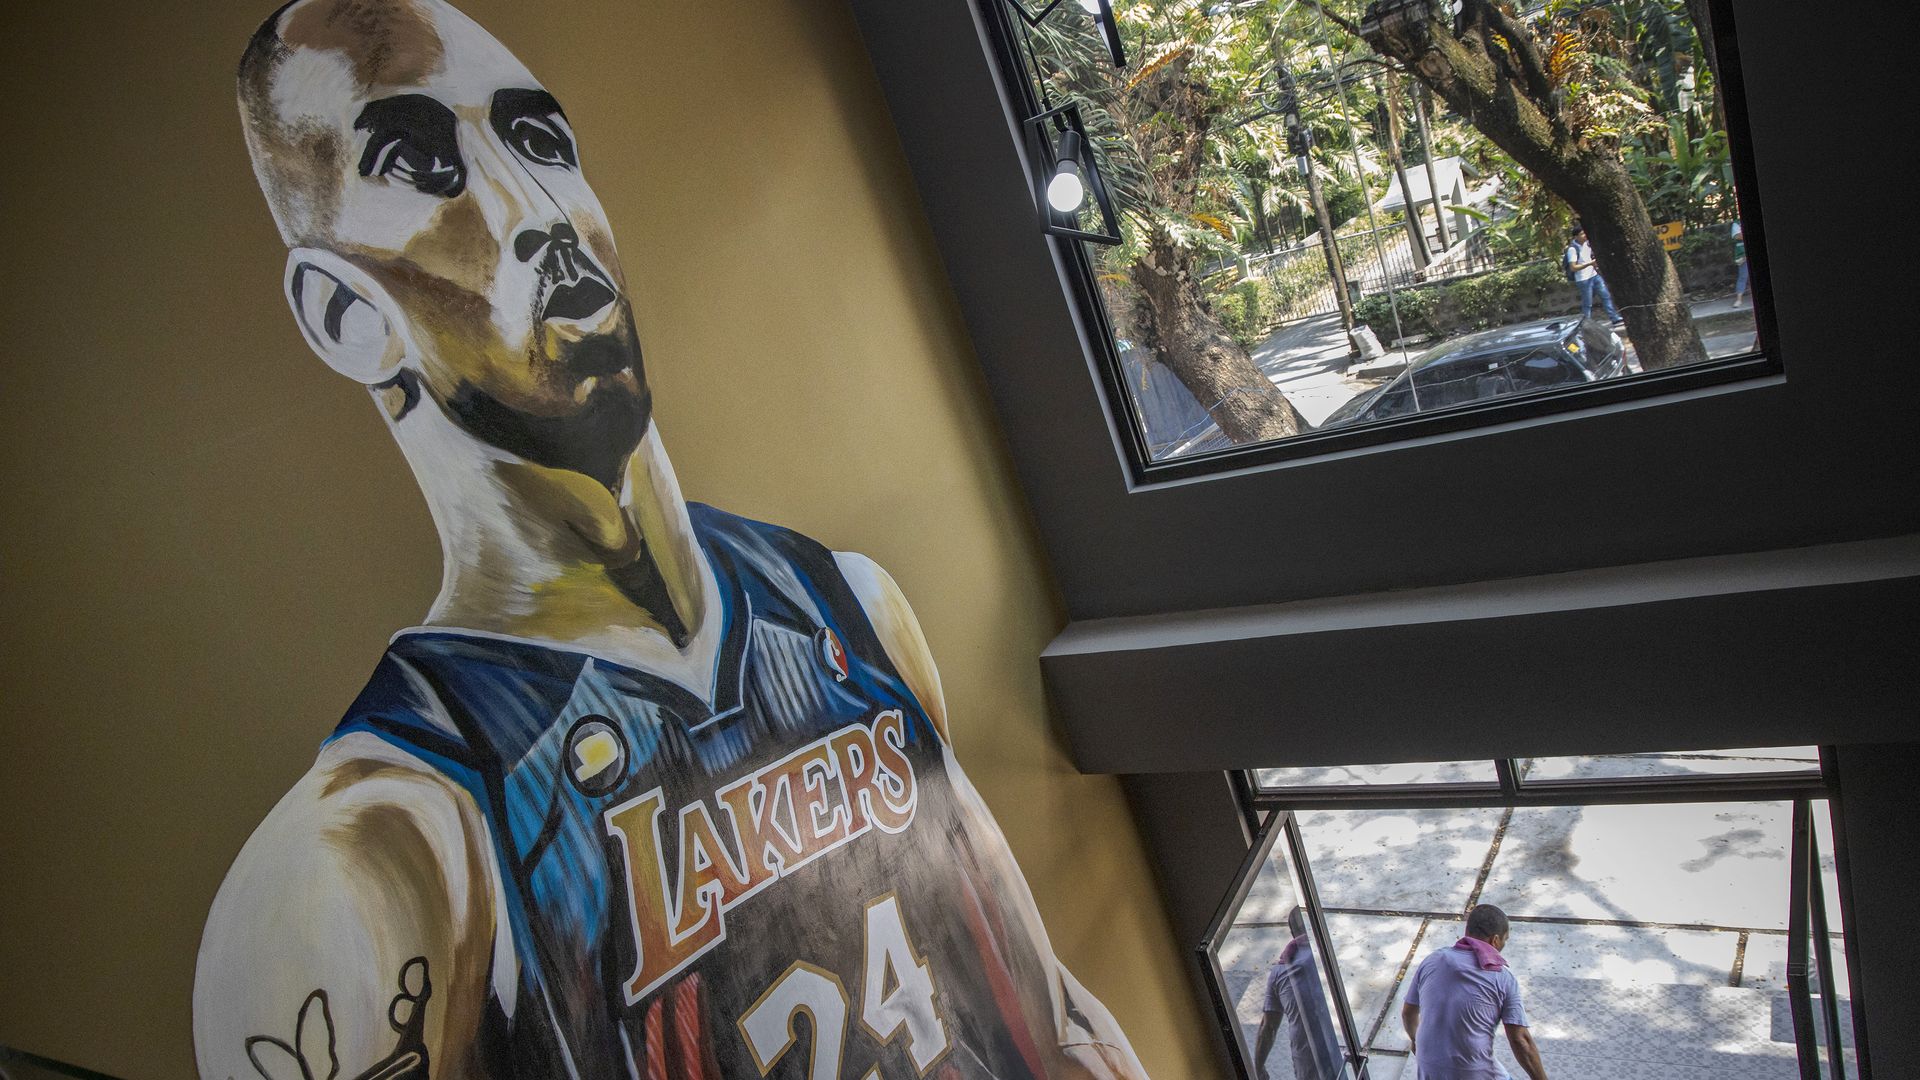 In this image Kobe Bryant is pictured in a mural on the wall in a stairwell 